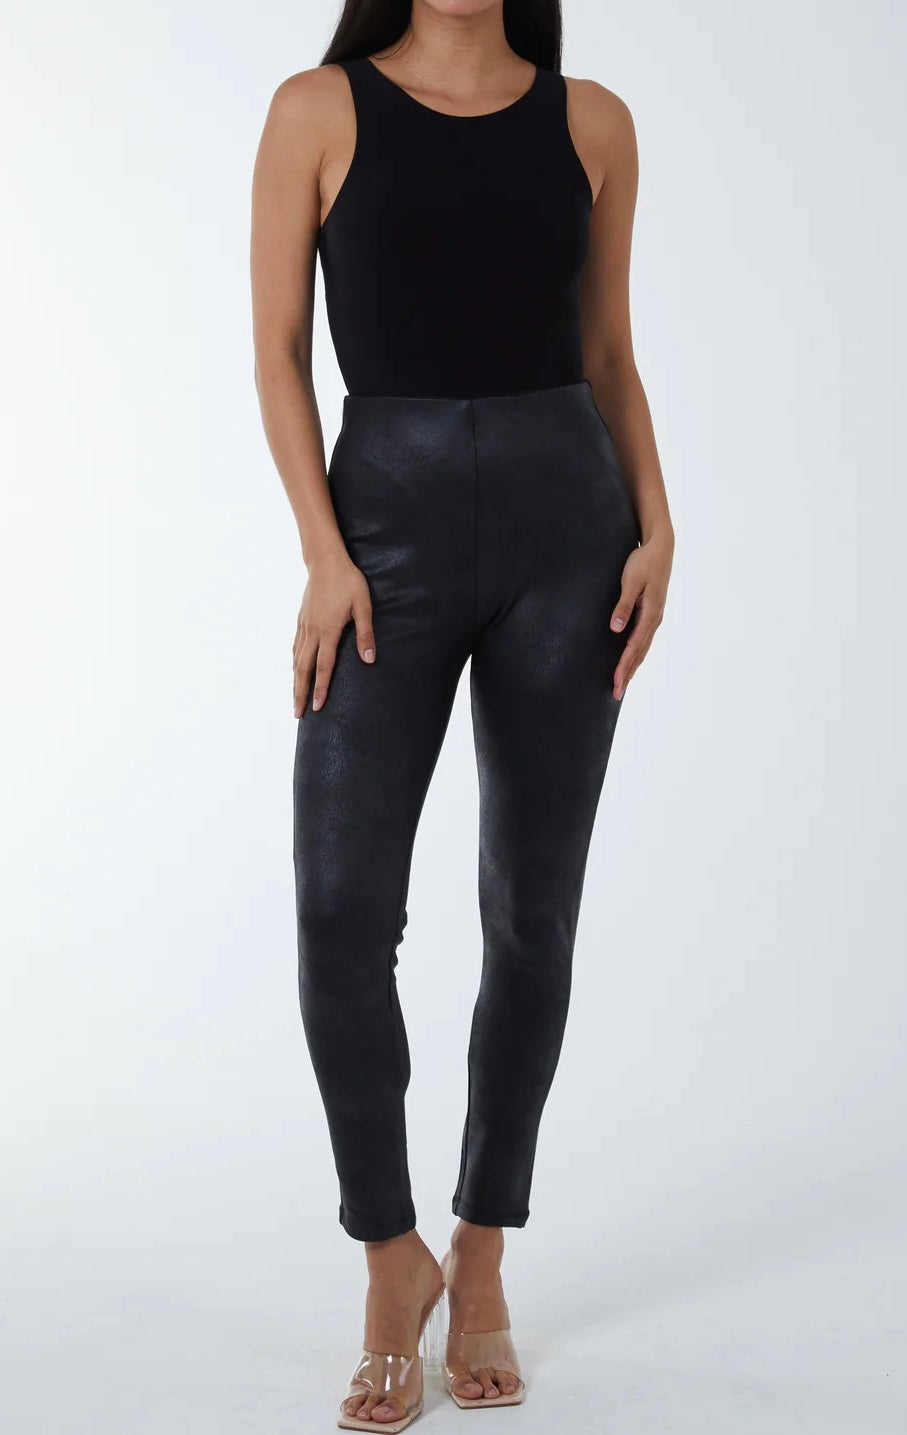 & Accessories Based Leggings – in Black Shoes, Matte Fashion Leather Look Leeds Missy Online: